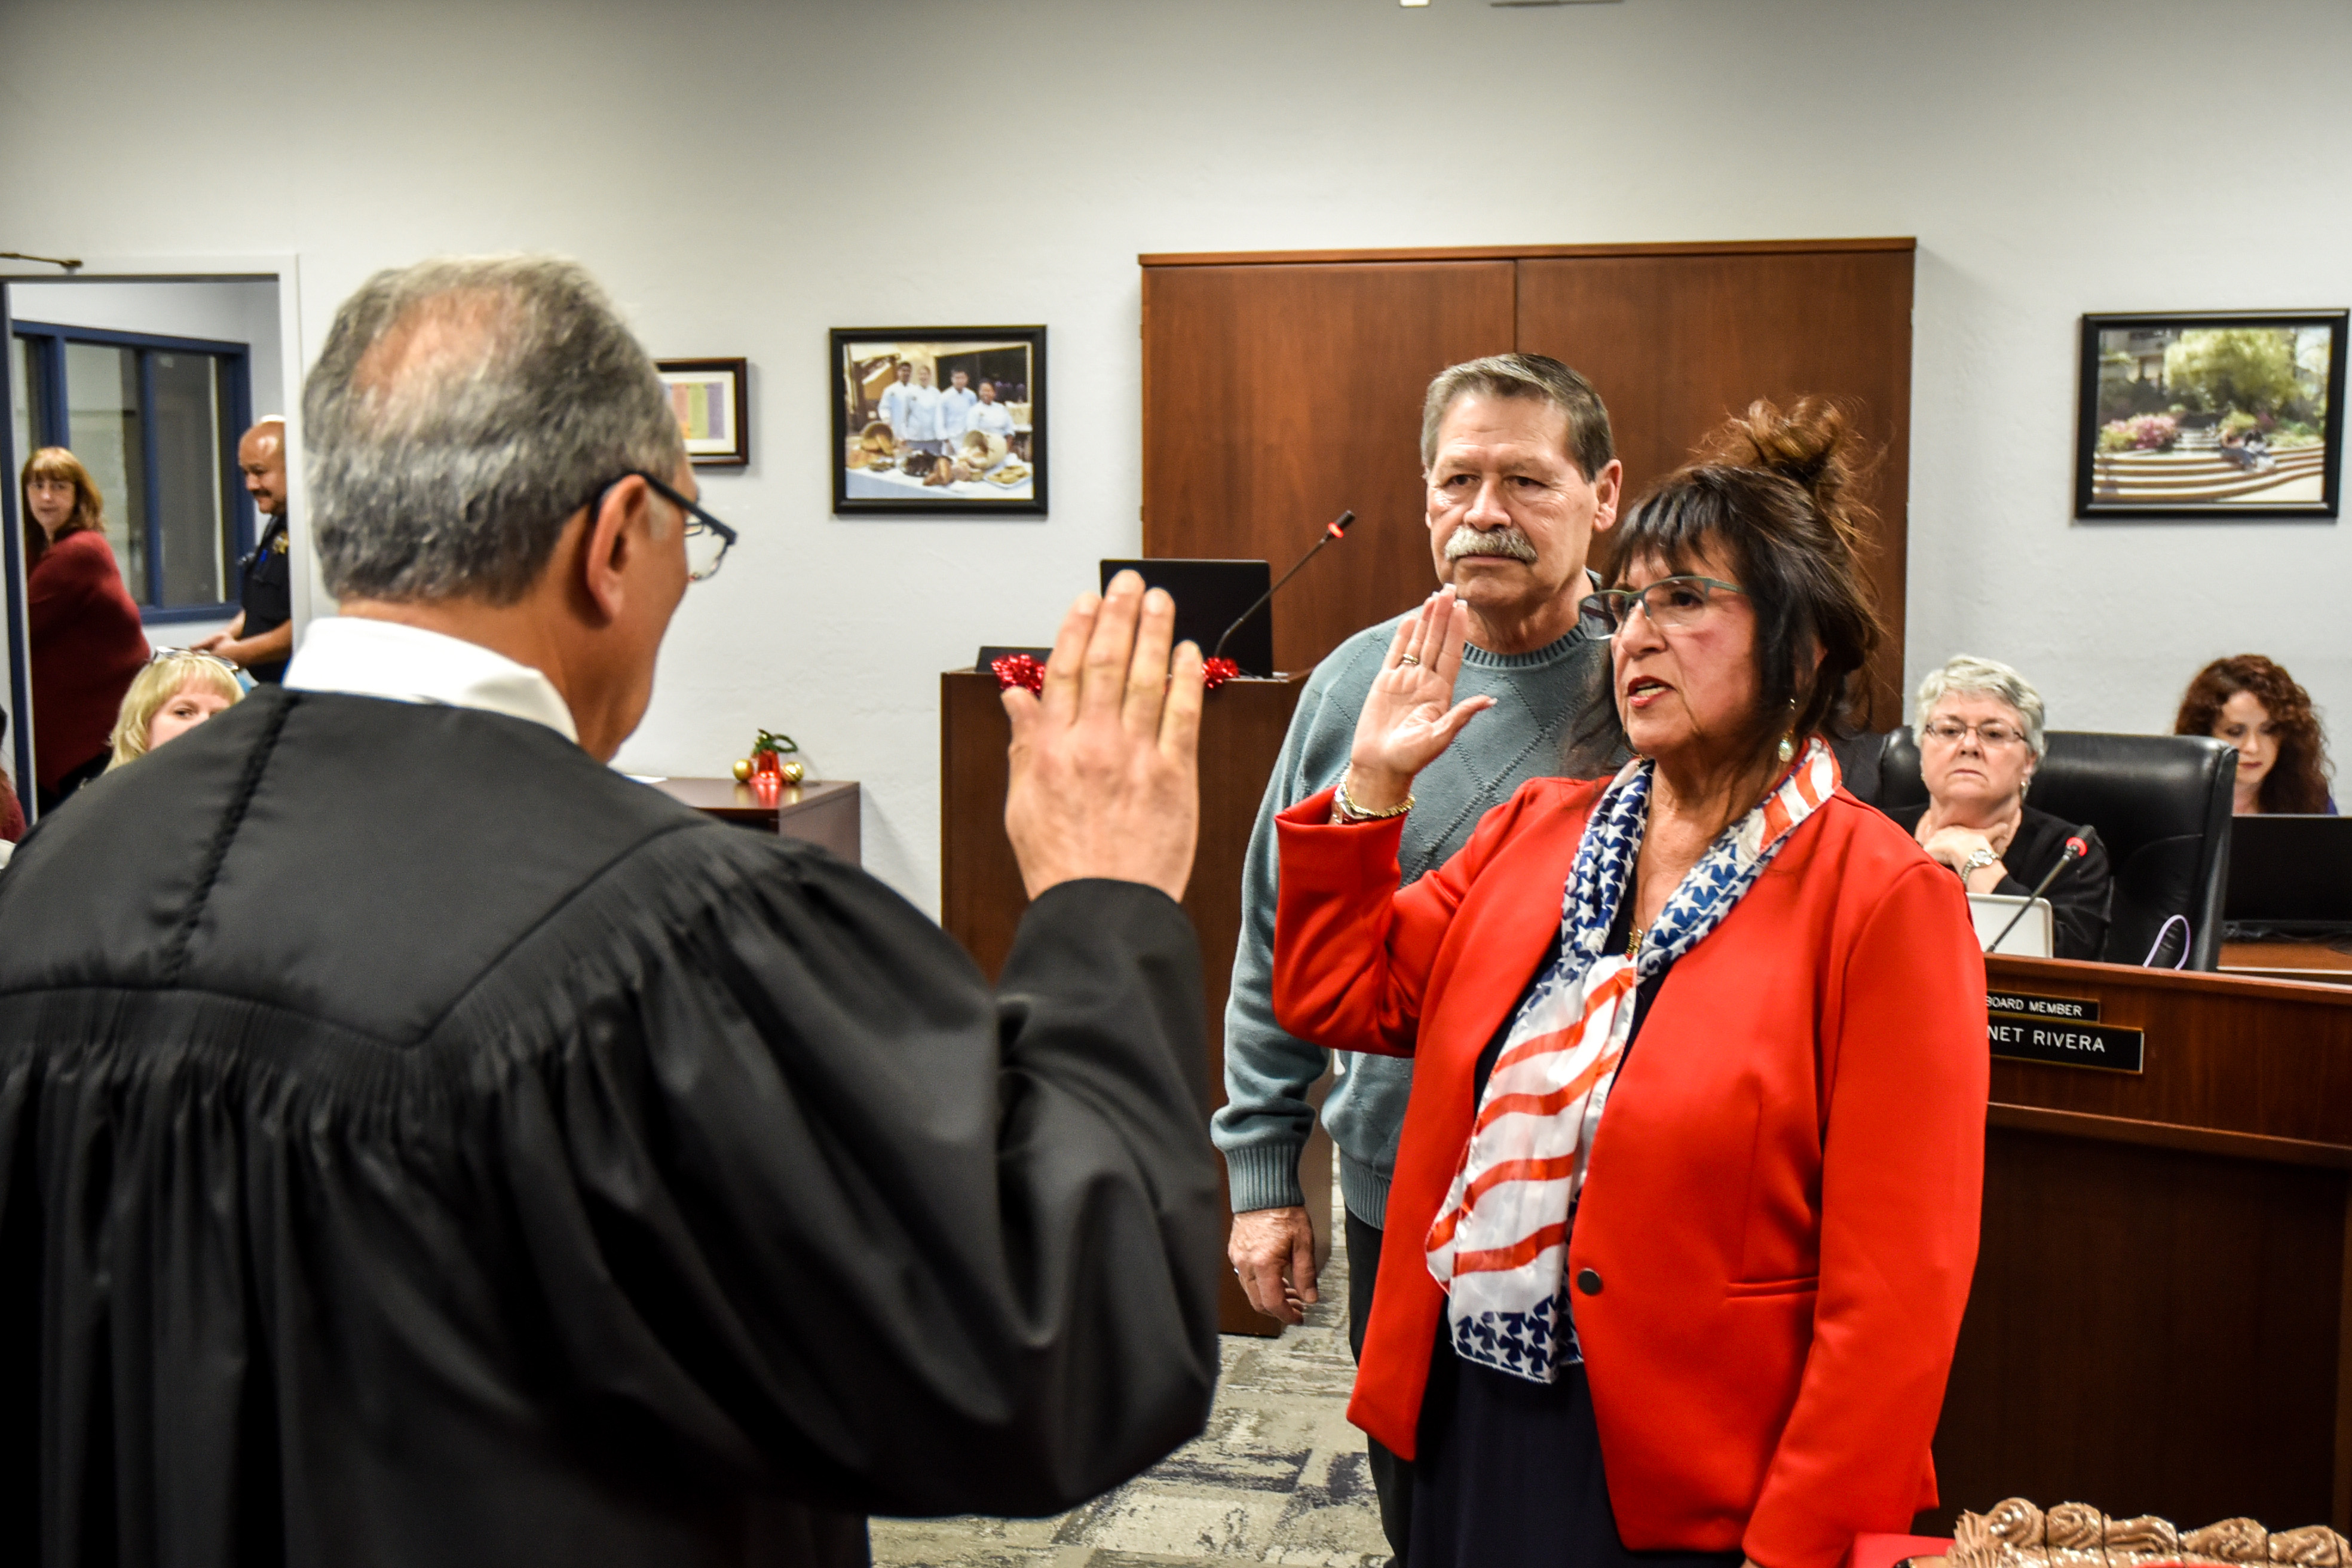 Returning San Joaquin Delta College Trustee Janet Rivera is sworn in while her husband, Rupert, watches.